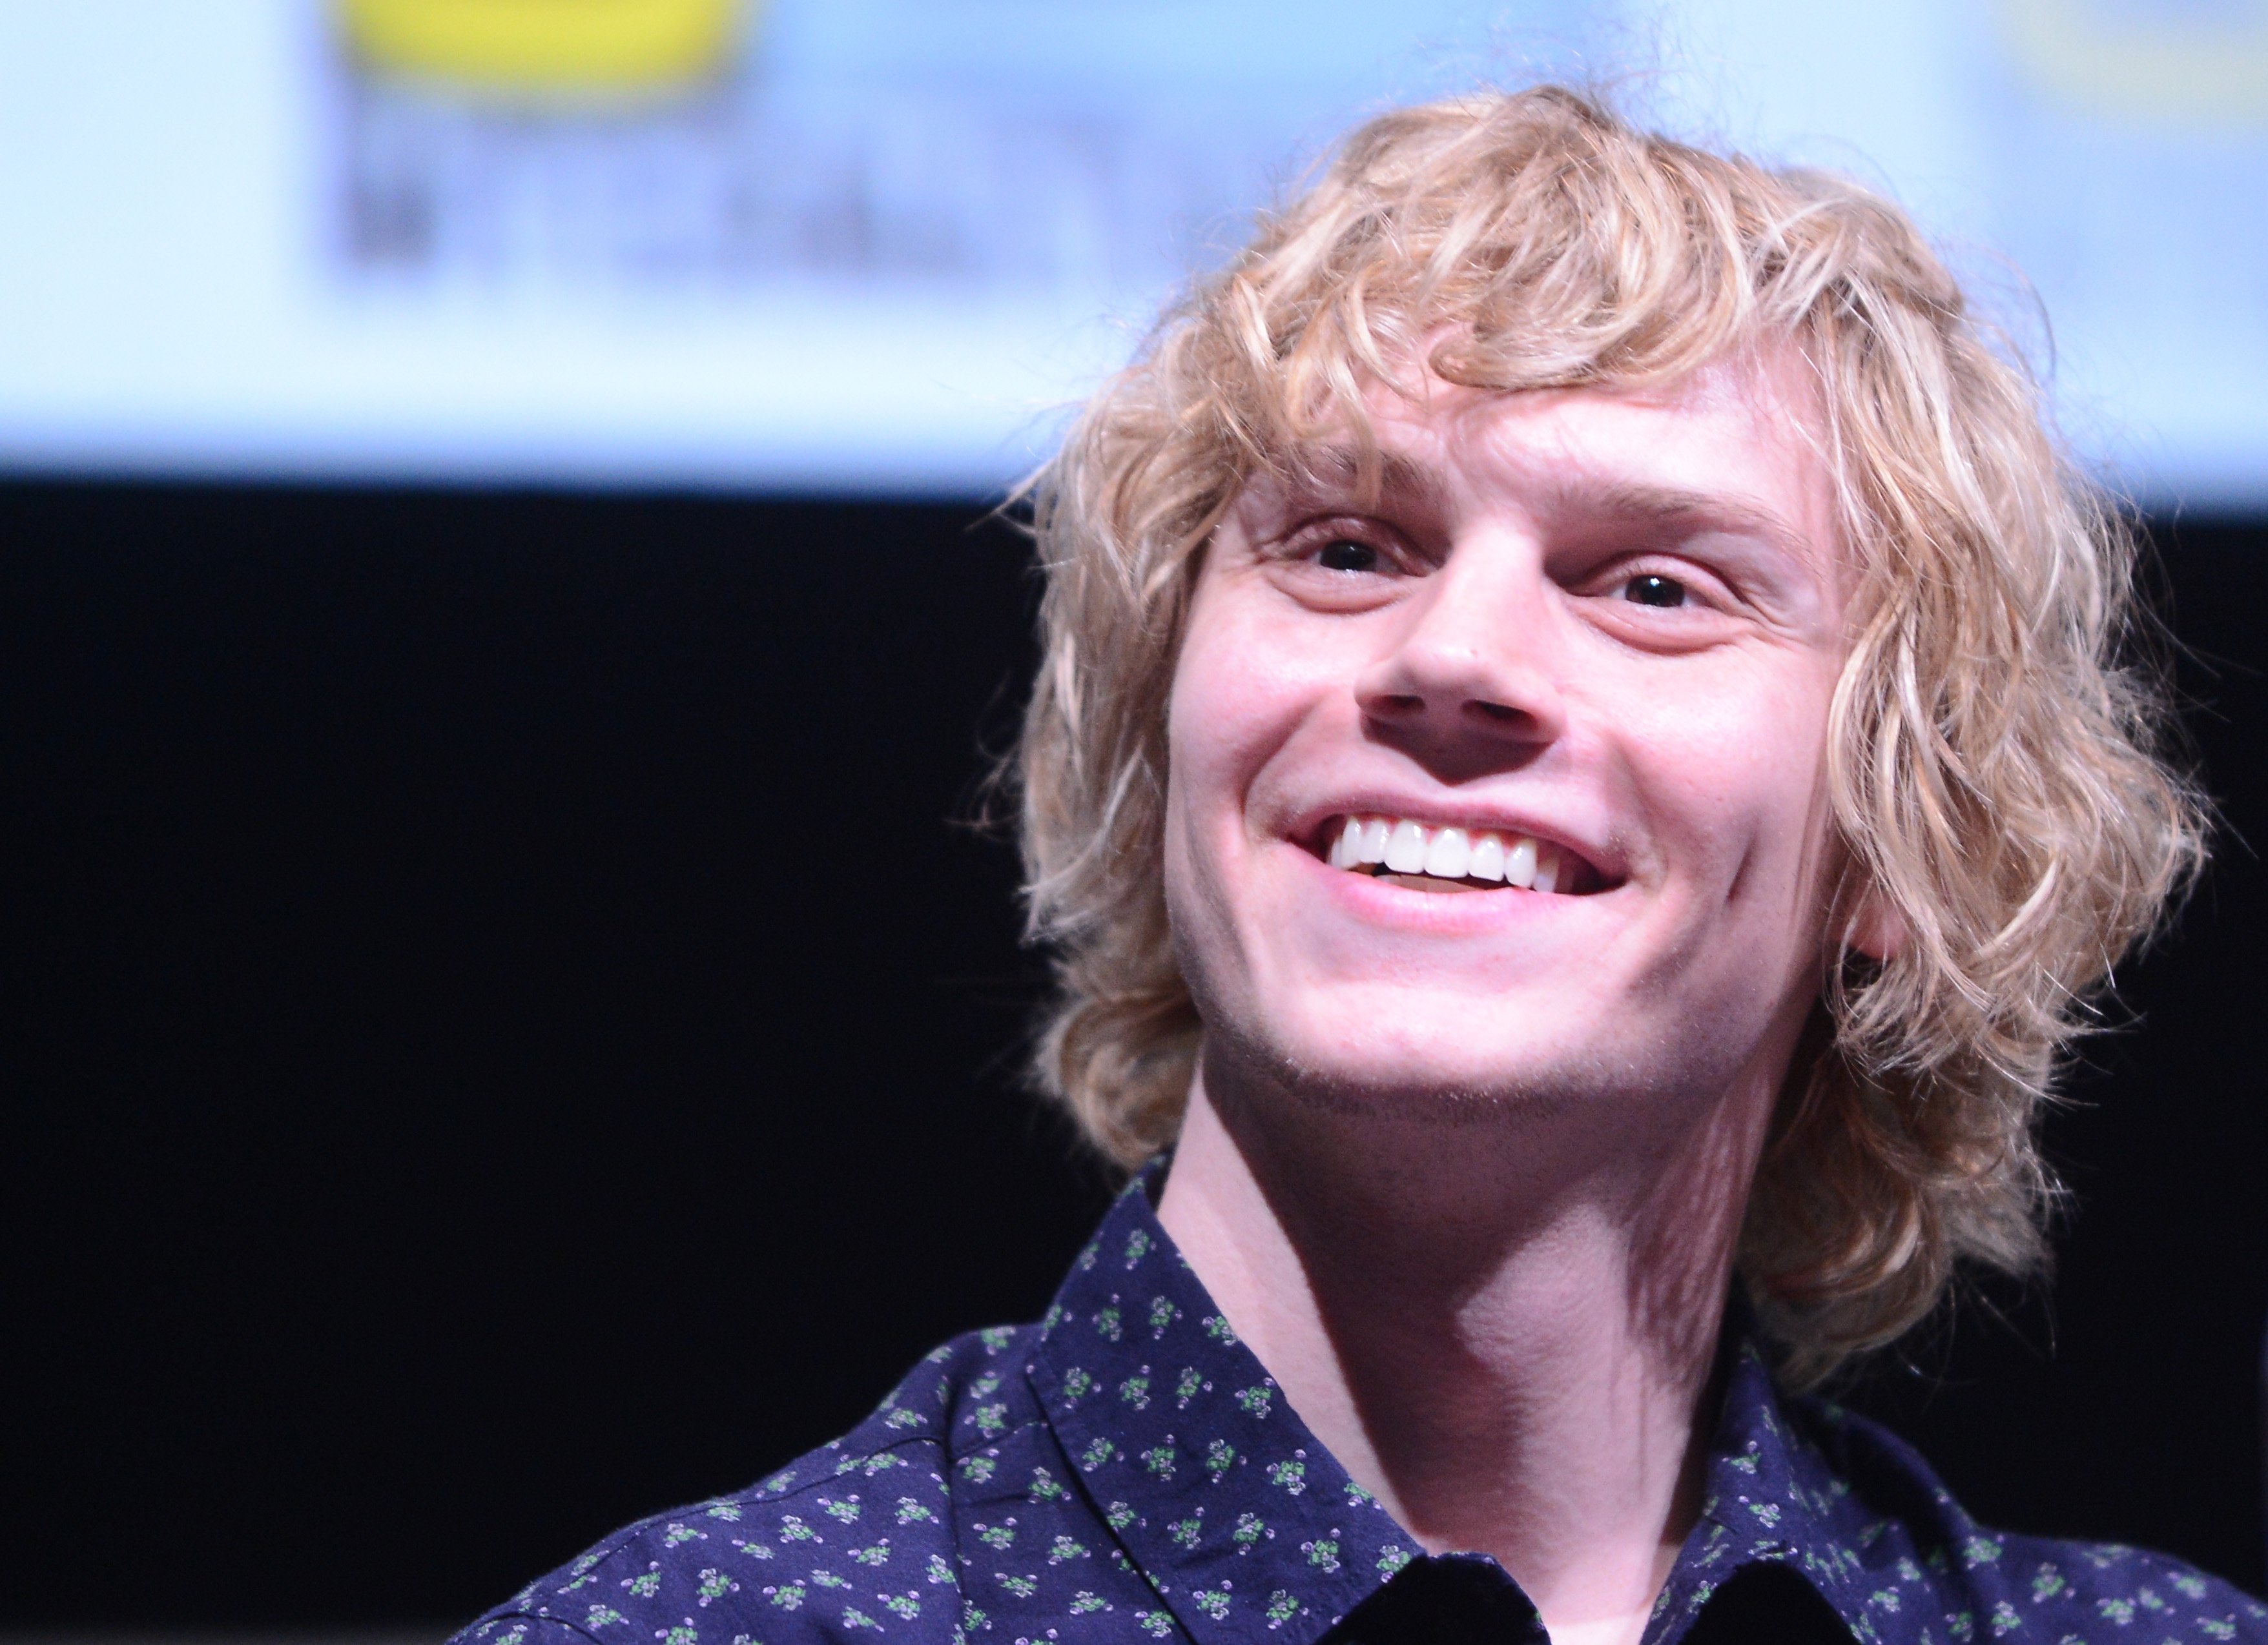 Actor Evan Peters of 'American Horror Story' at Comic-Con